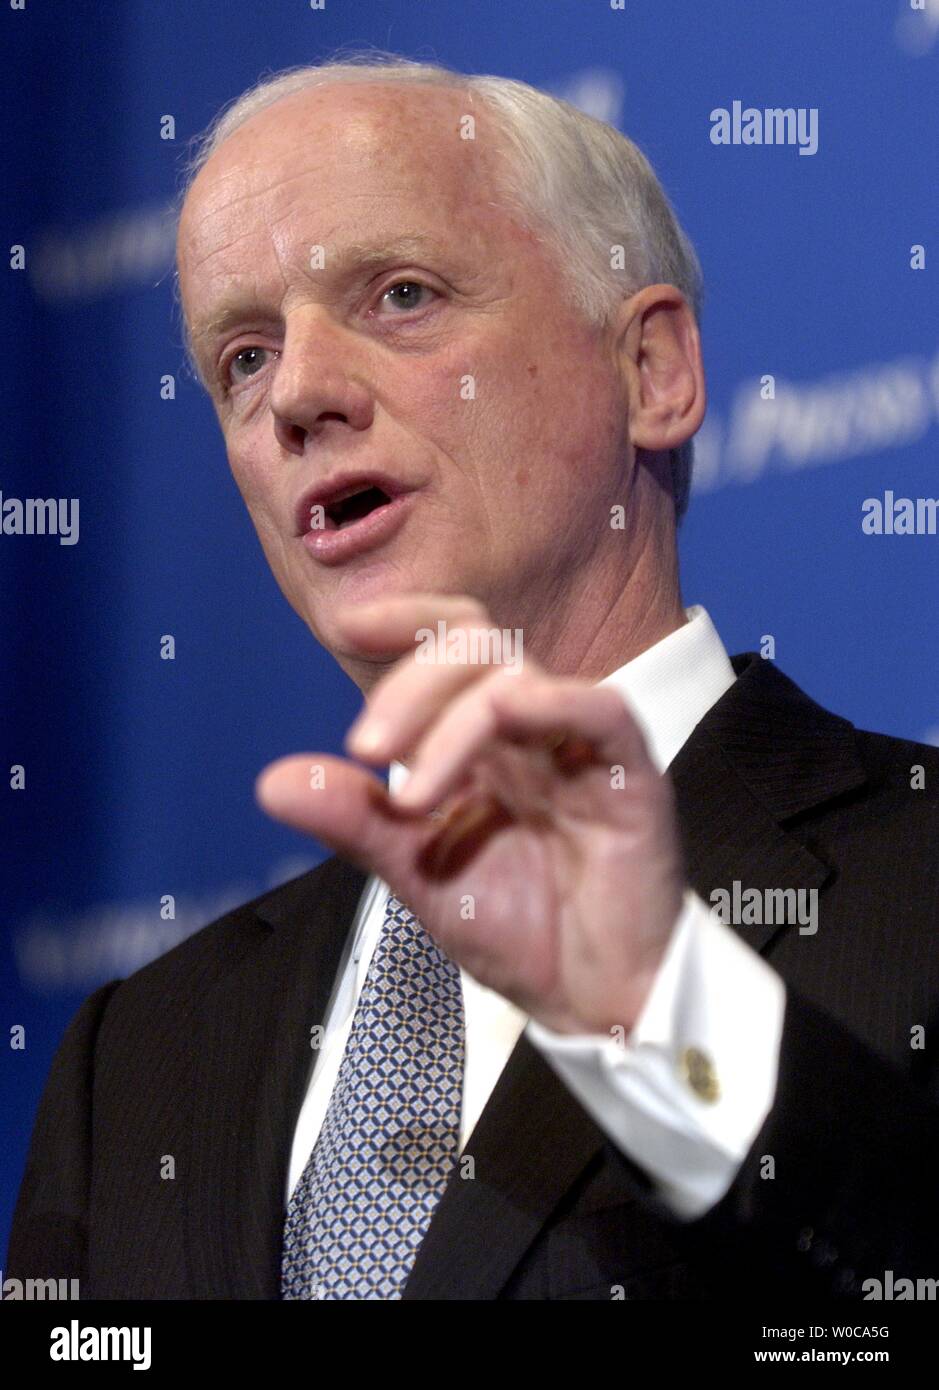 Former Governor Frank Keating, who is now the President and CEO of the American Council of the Life Insurers speaks at the National Press Club on January 20, 2004 in Washington.  Keating discussed the impending problems of America's baby boomers who are not saving enough, and the ramifications that will have on the country. (UPI Photo/Michael Kleinfeld) Stock Photo